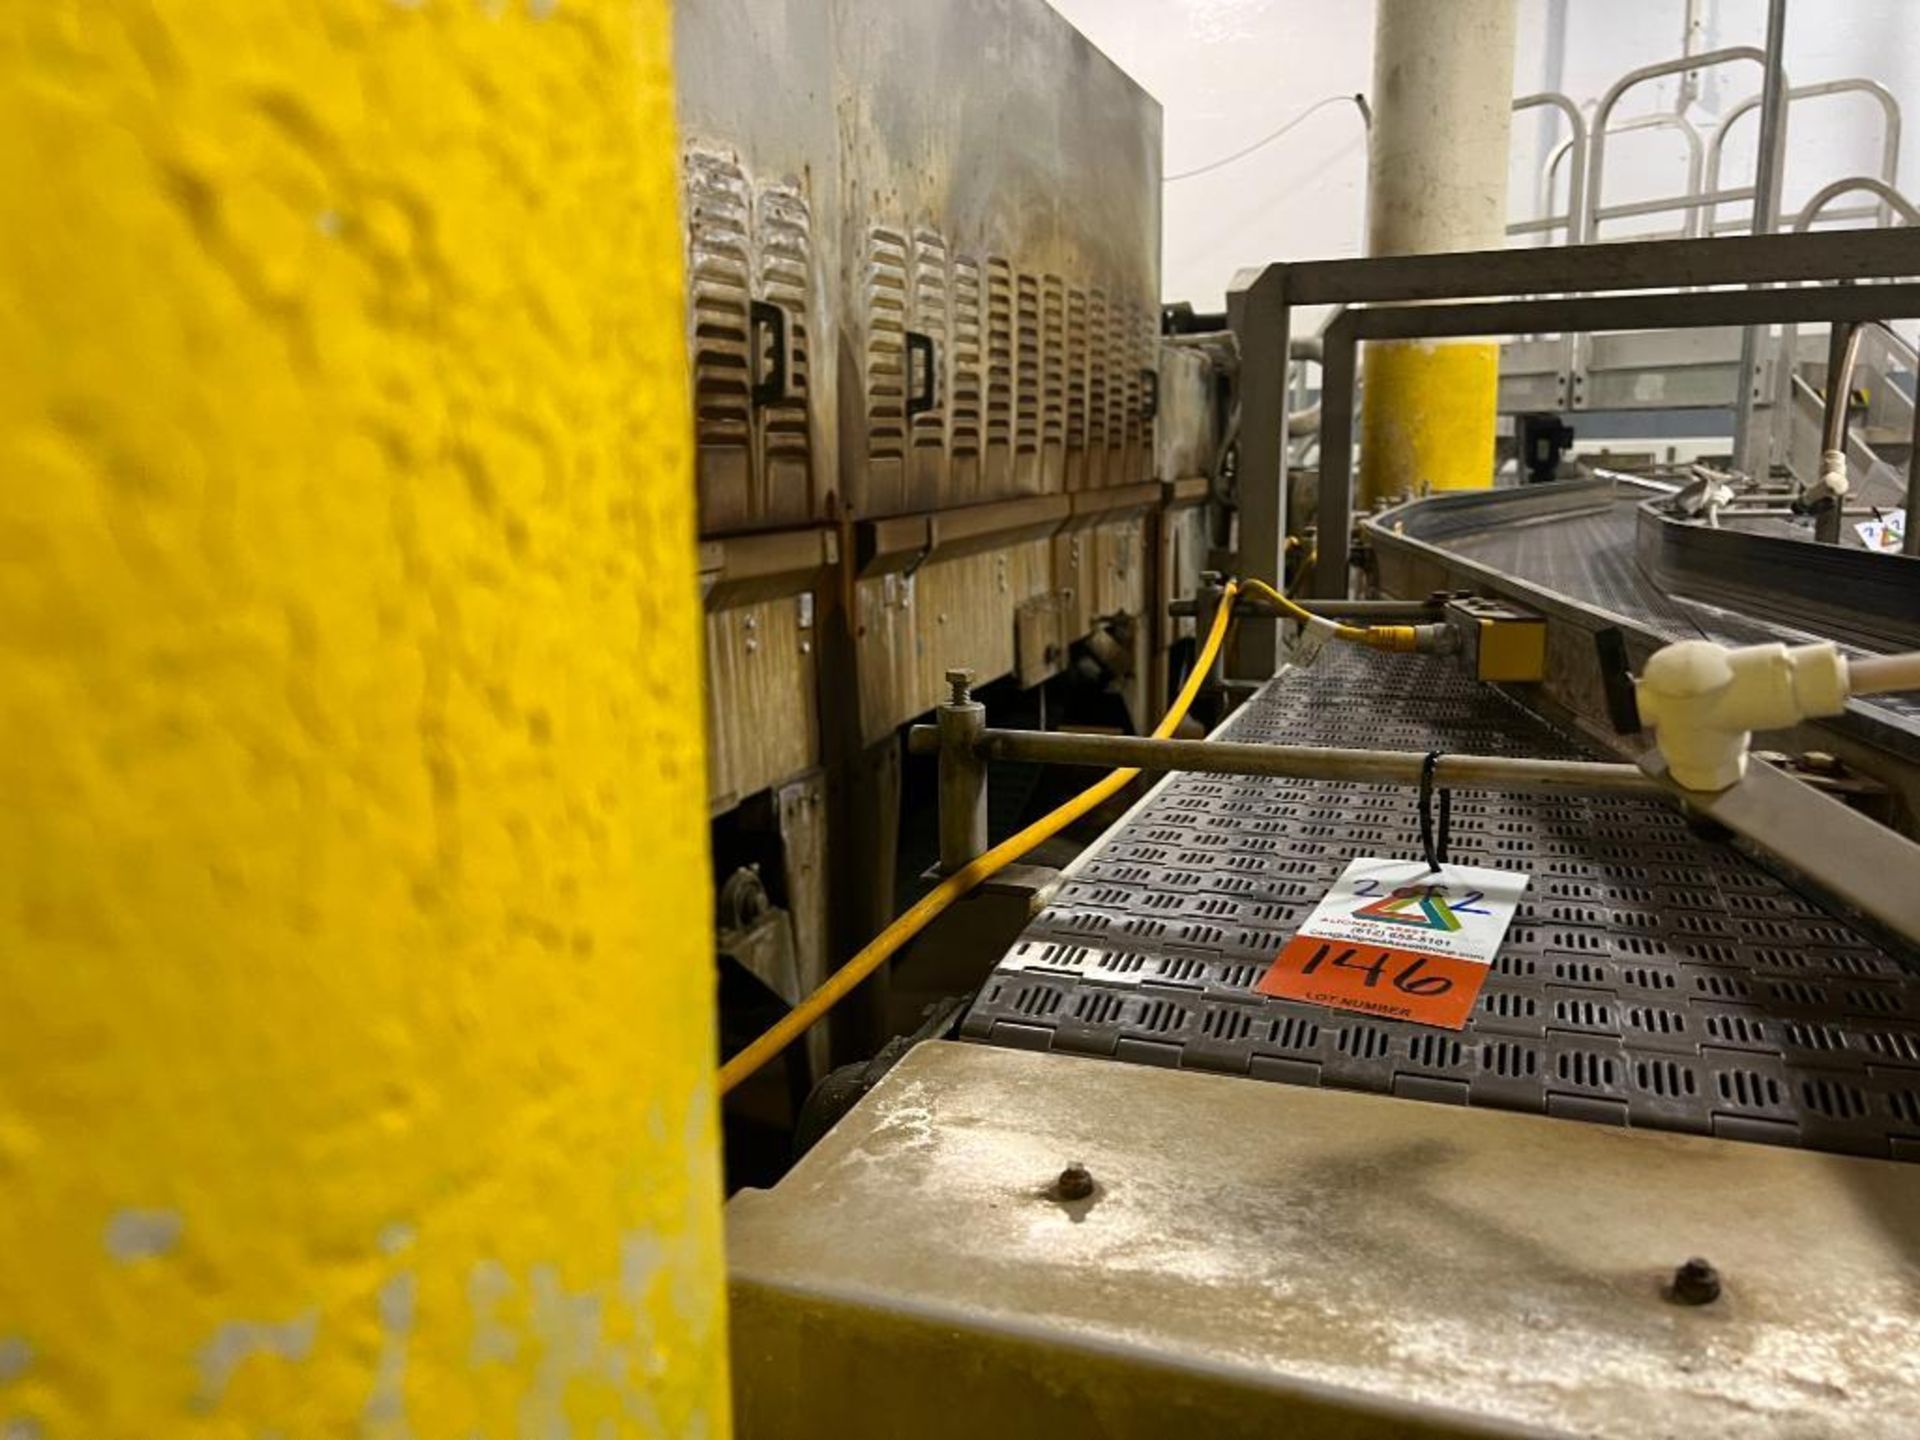 stainless steel can conveyor - Image 13 of 13